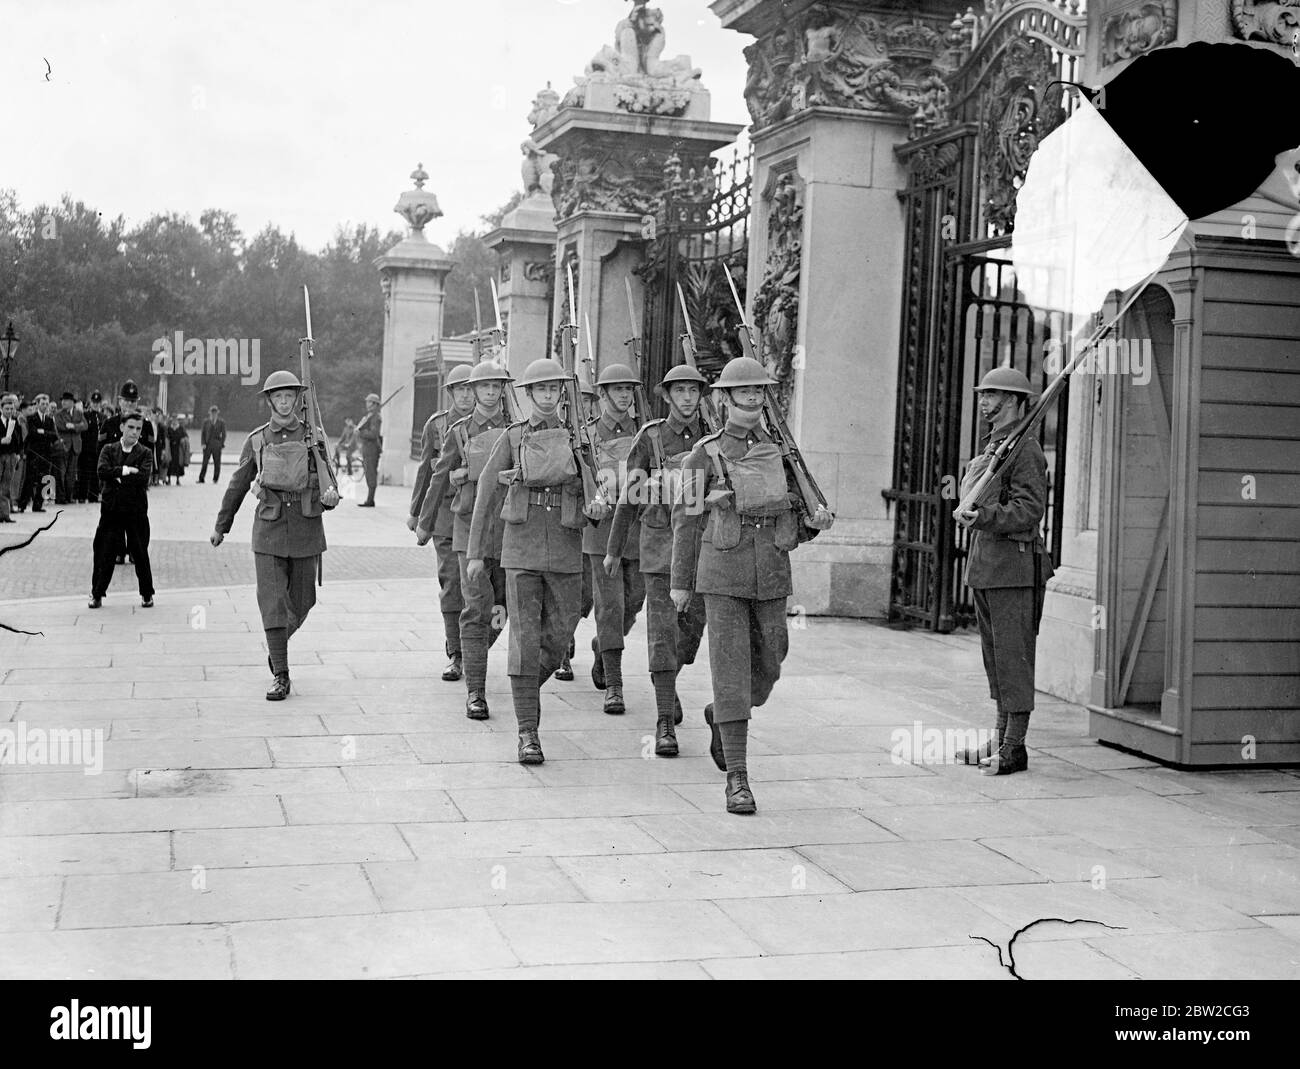 The guards wore steel helmets during the changing of the guard ceremony at Buckingham Palace. 2 September 1939 Stock Photo